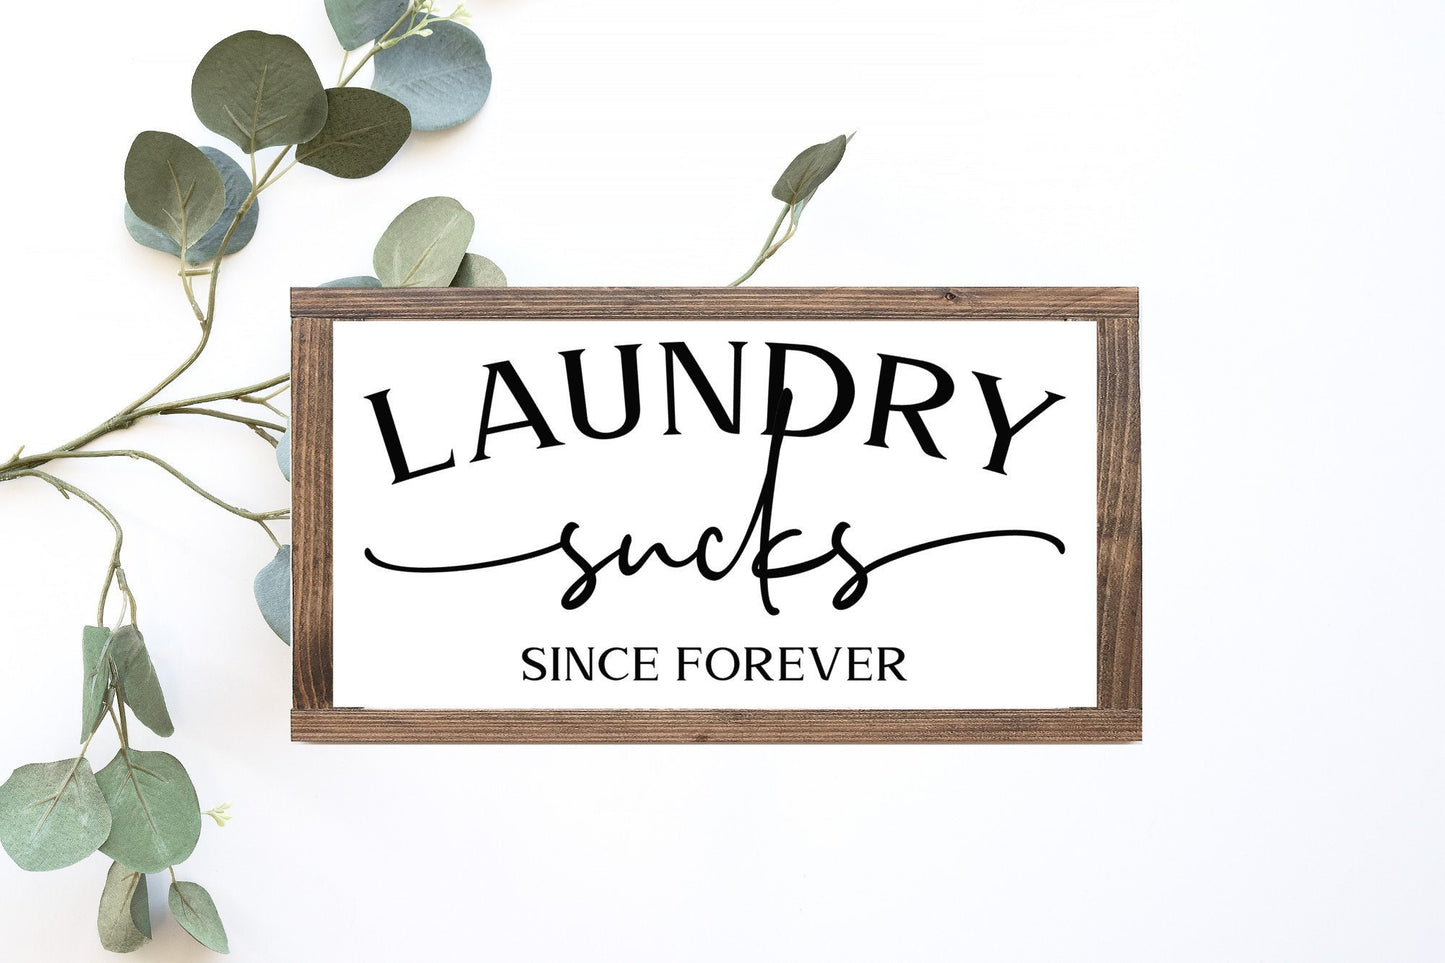 Laundry Sucks Since Forever Wood Sign